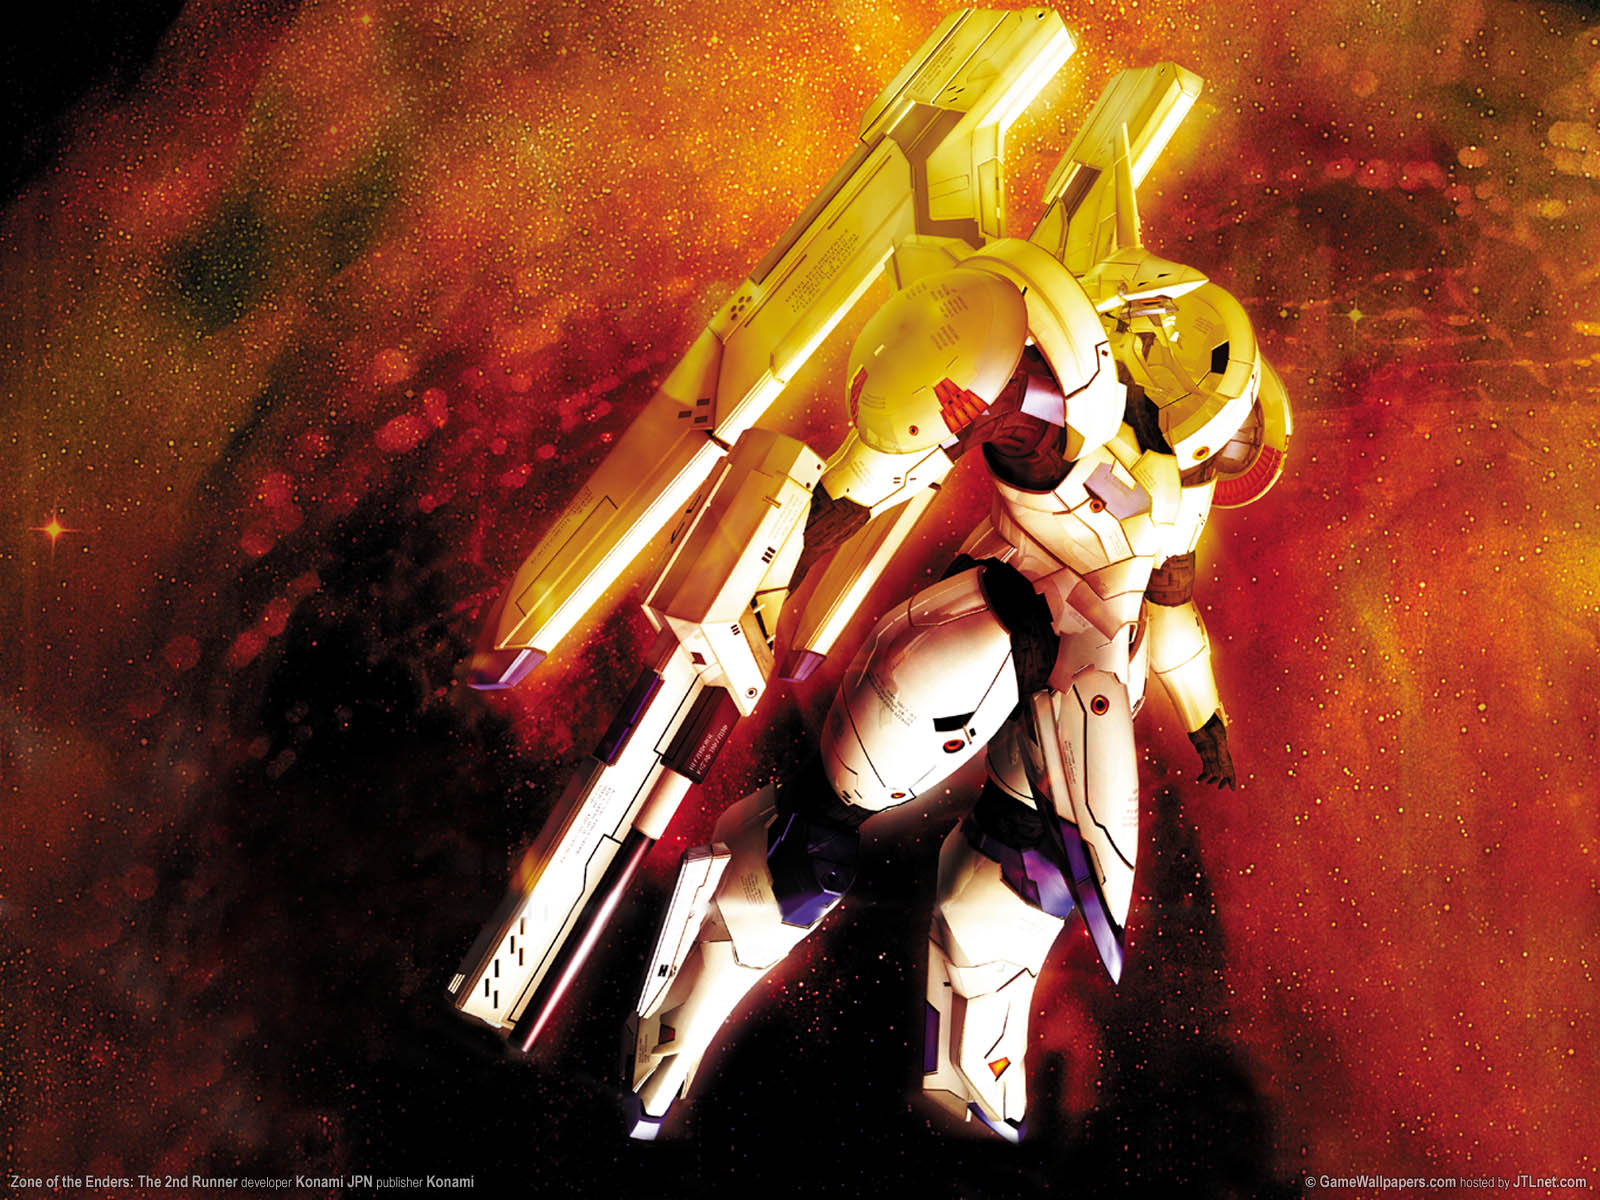 Zone of the Enders: The 2nd Runner wallpaper 02 1600x1200